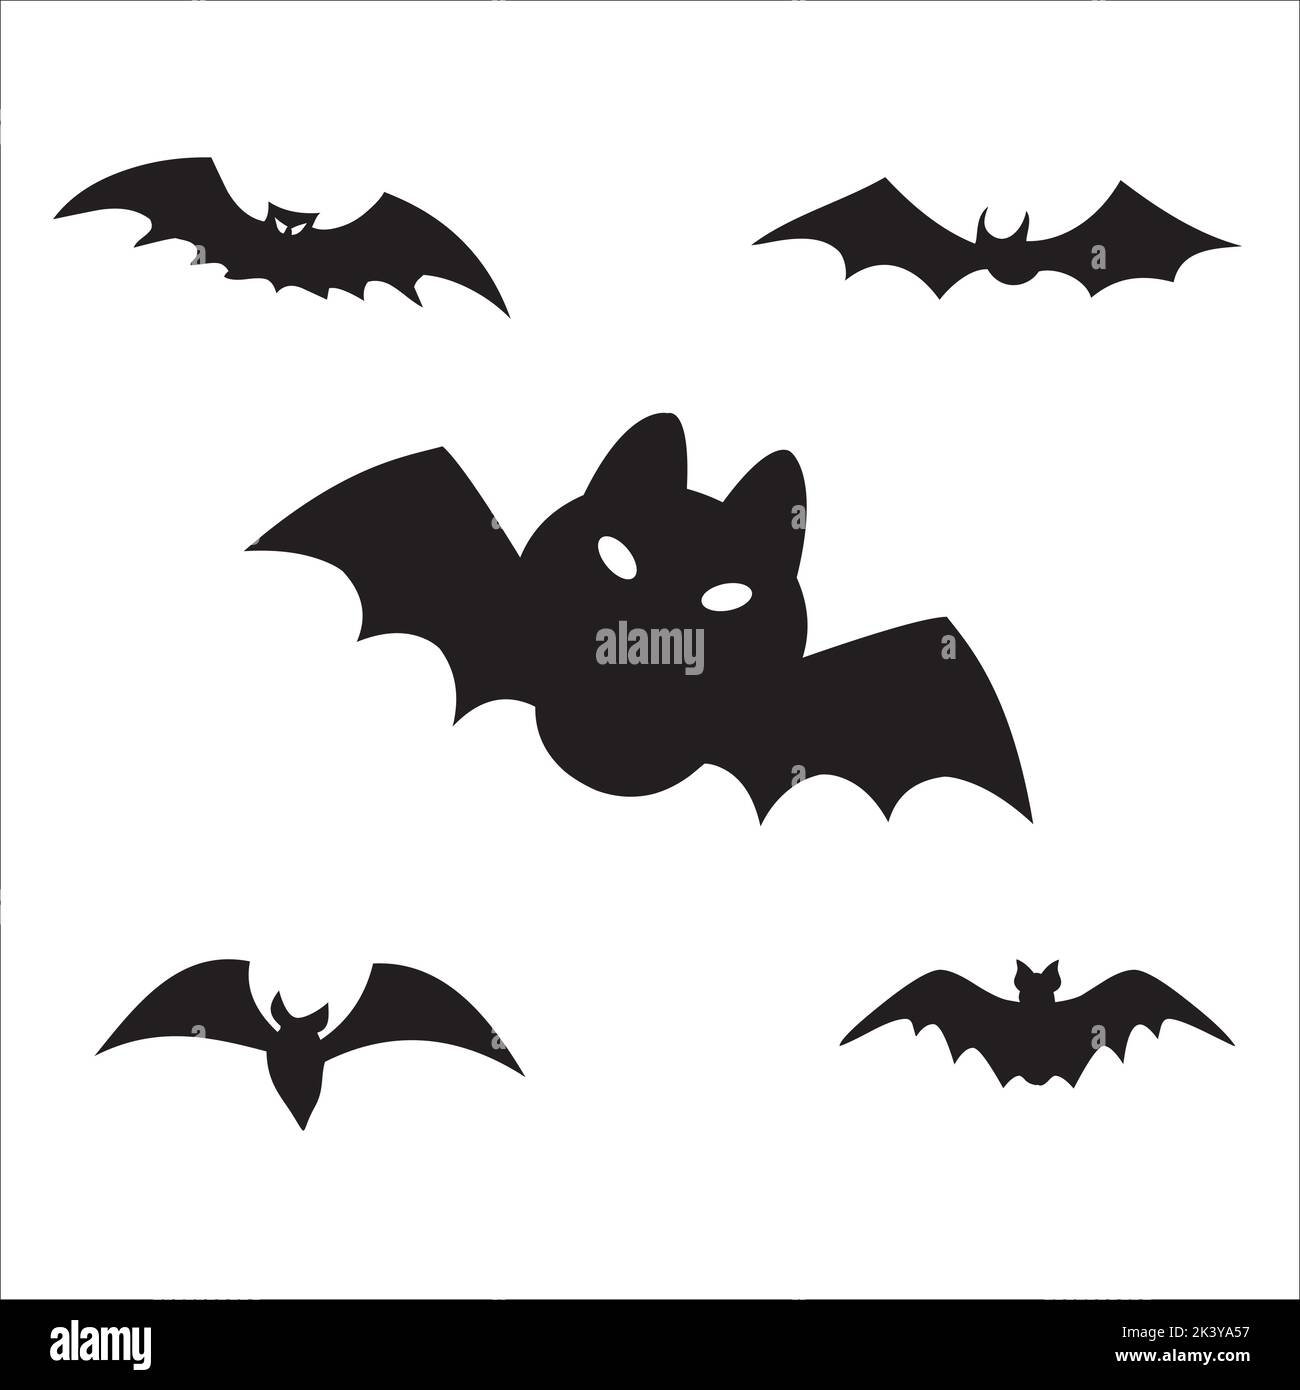 Vector Set Of Halloween Bats Silhouettes Illustration Isolated On White Background Stock Vector